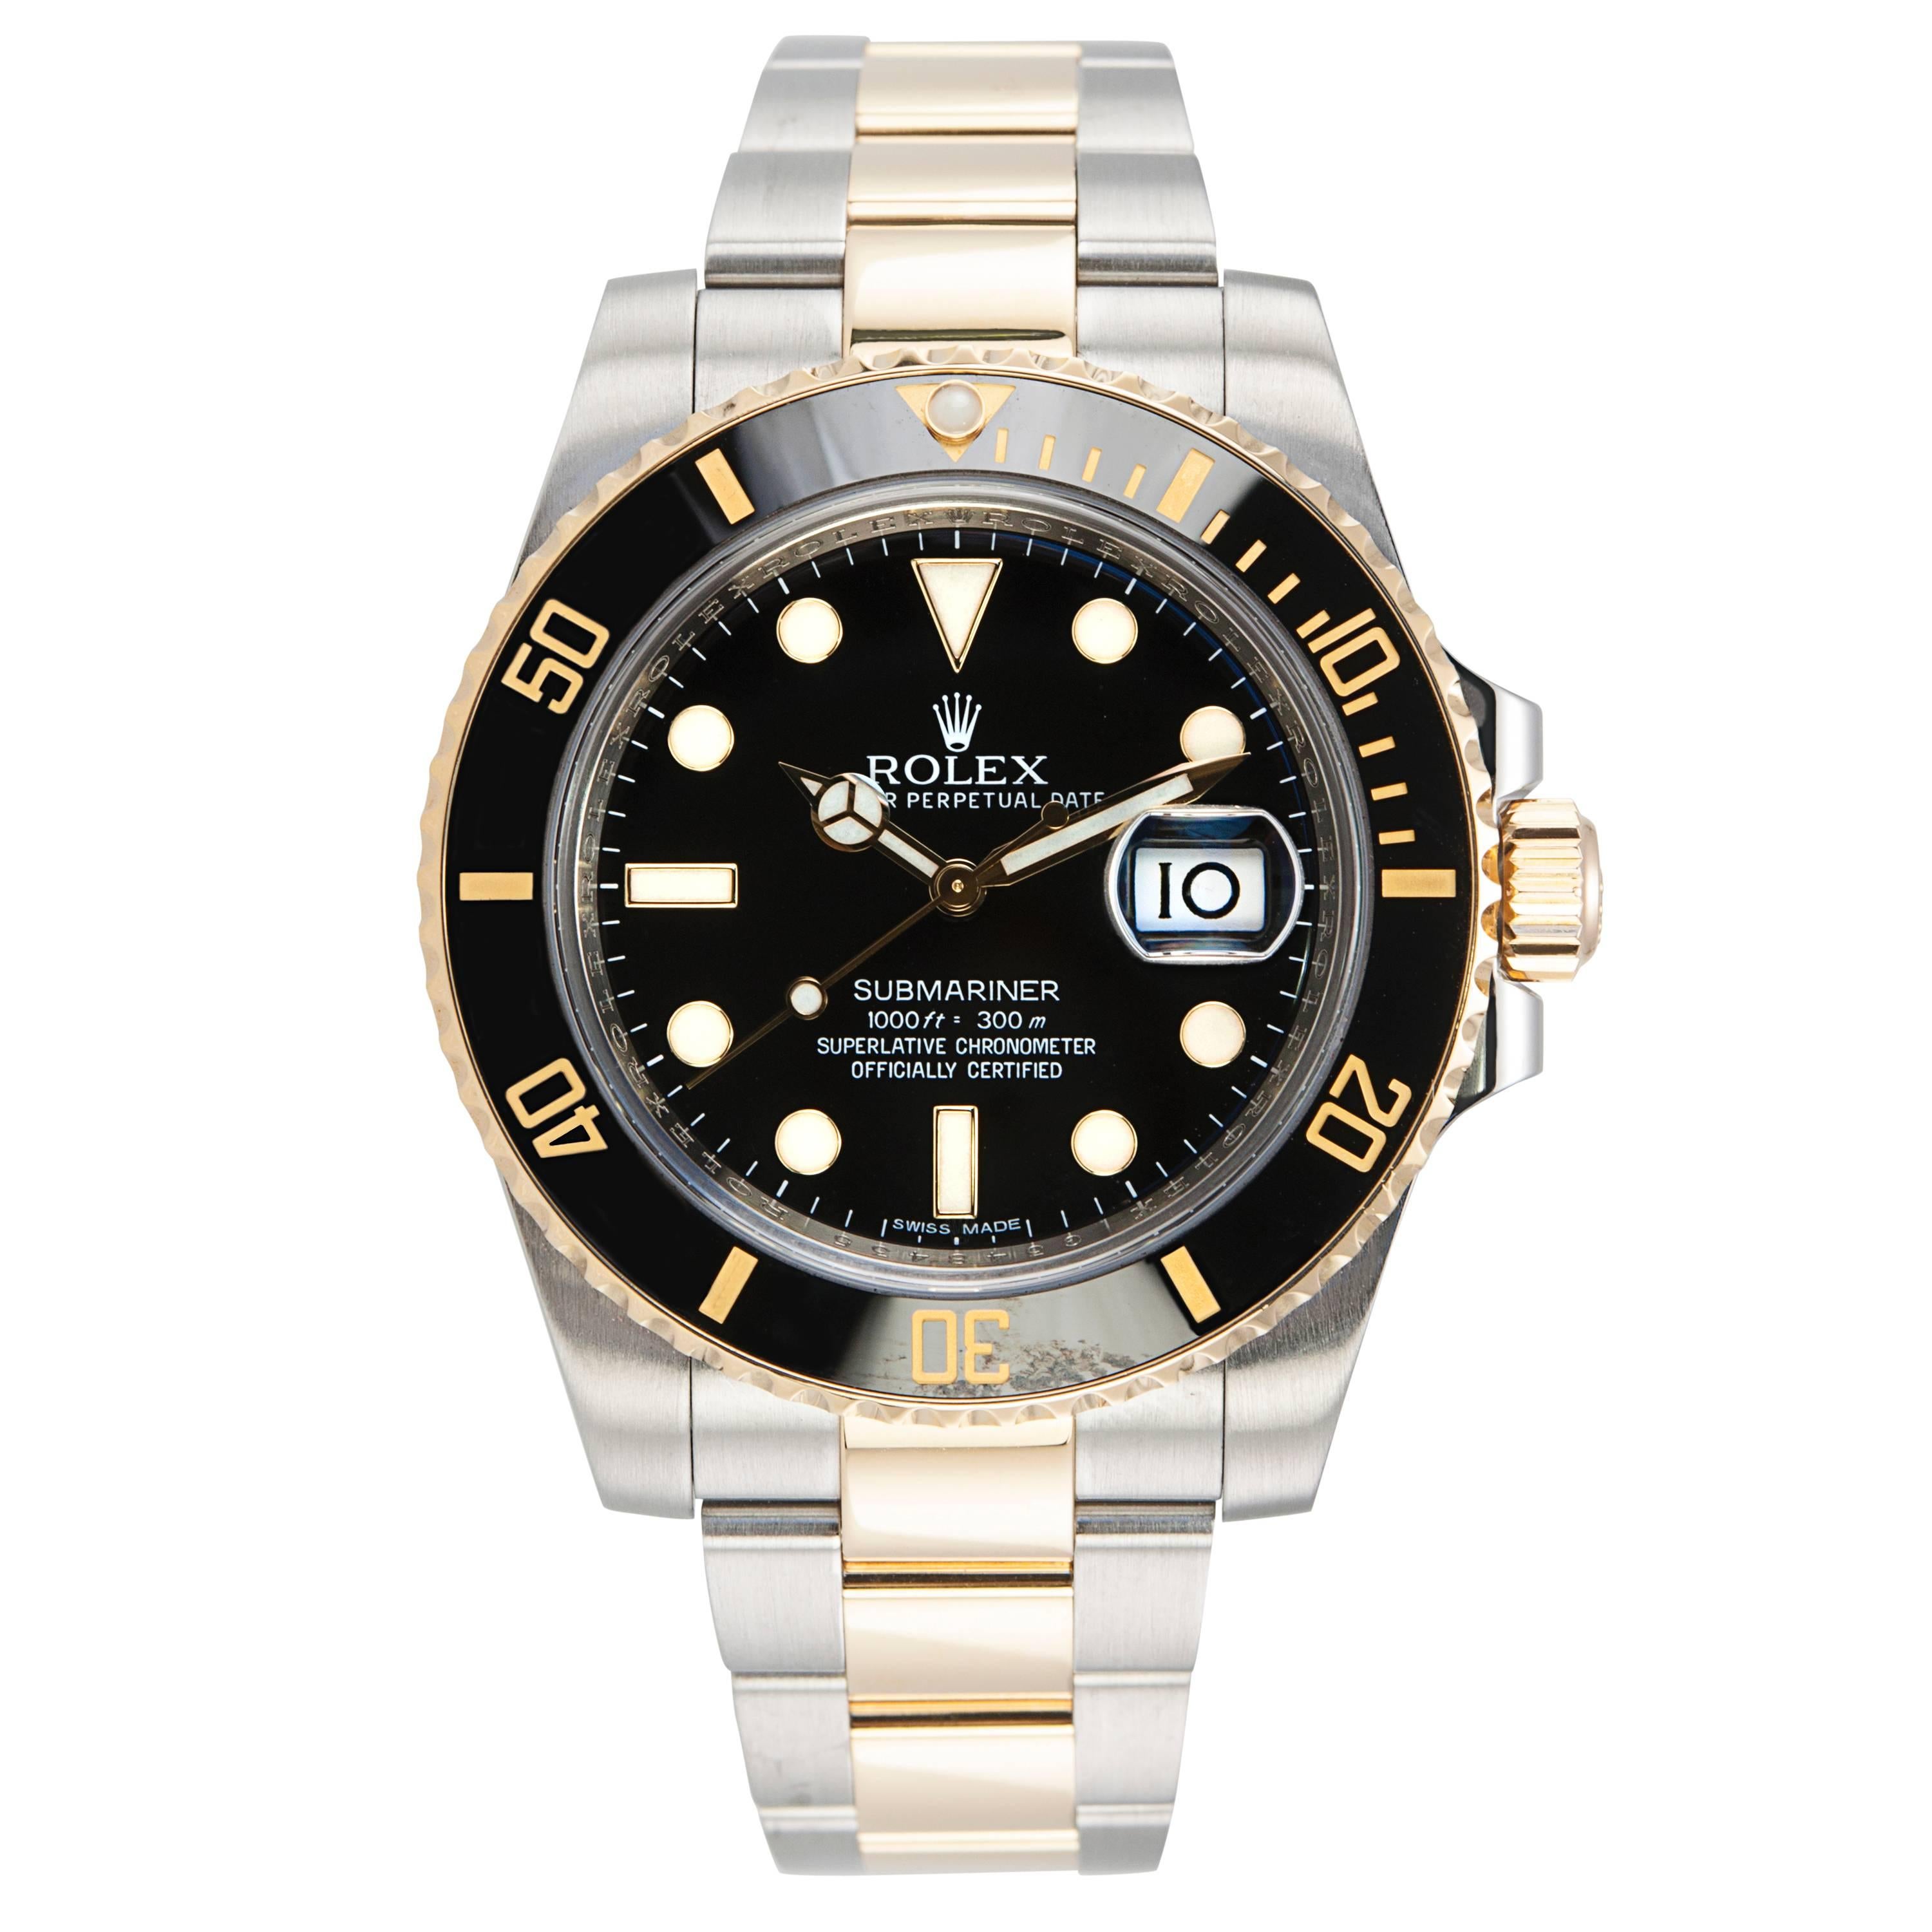 Rolex Yellow Gold Stainless Steel Submariner Wristwatch Ref 116613 For Sale